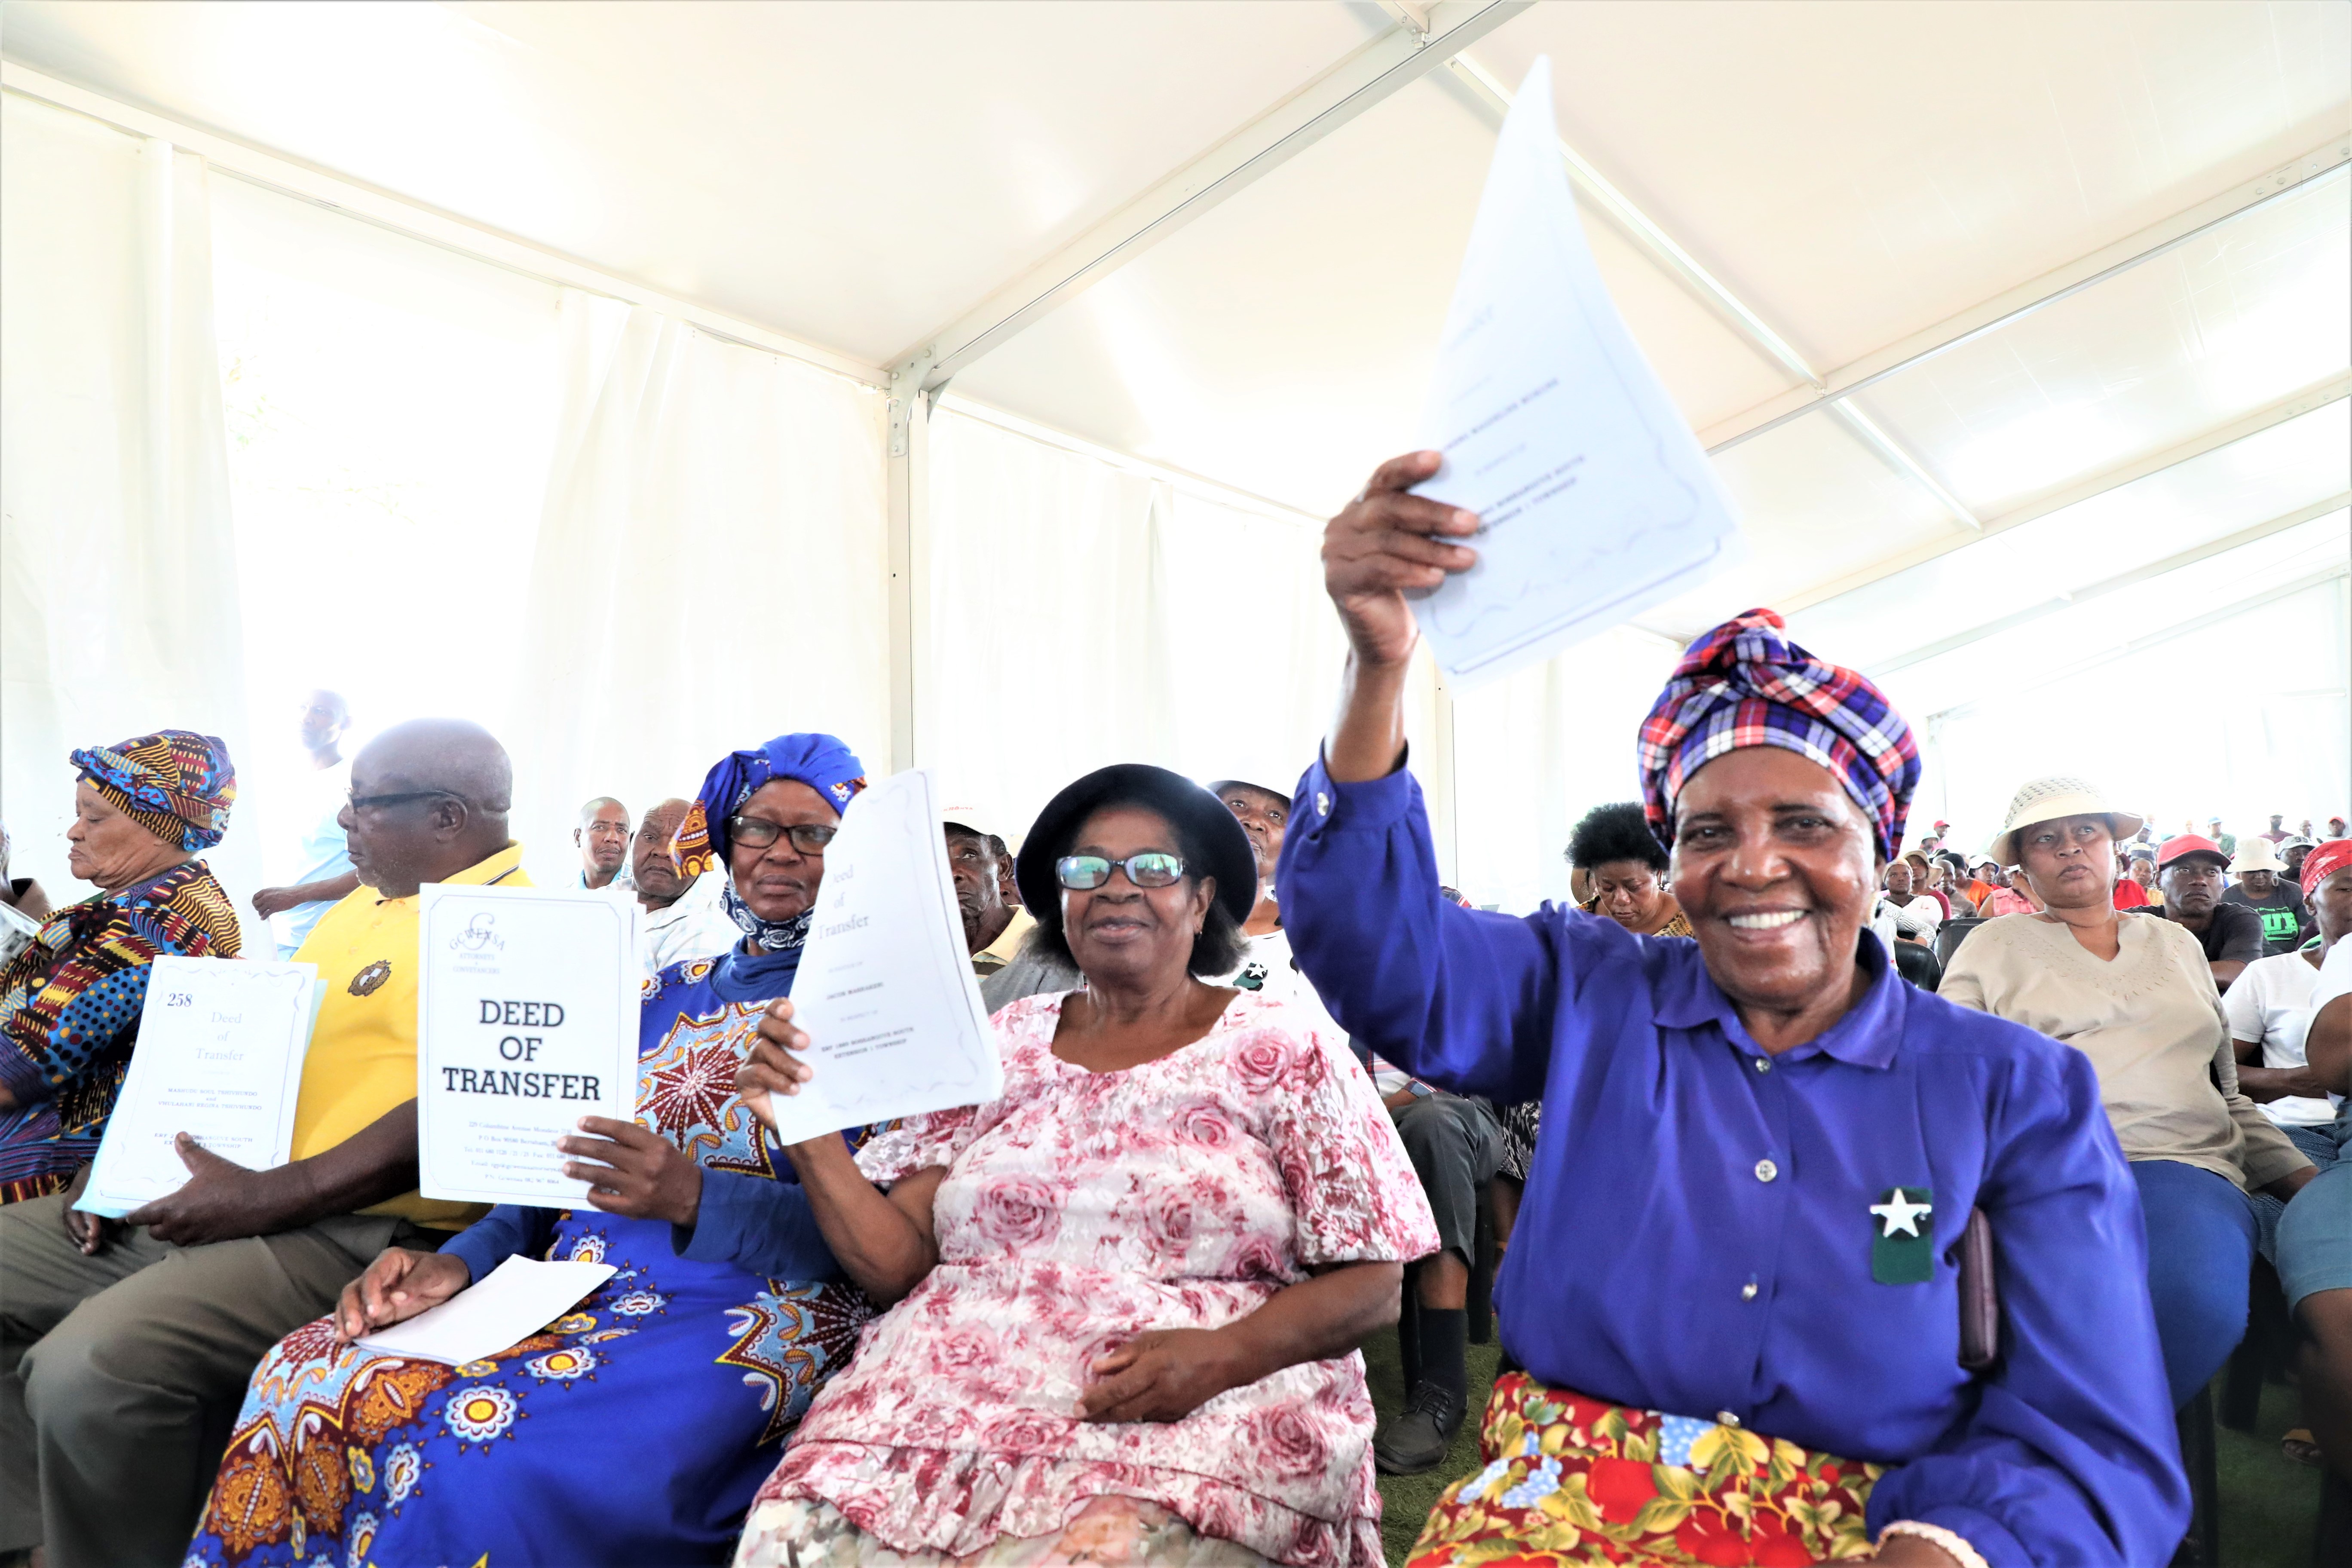 The Department of Human Settlements handed over 555 title deeds to qualifying and deserving beneficiaries in Soshanguve South Extension 1